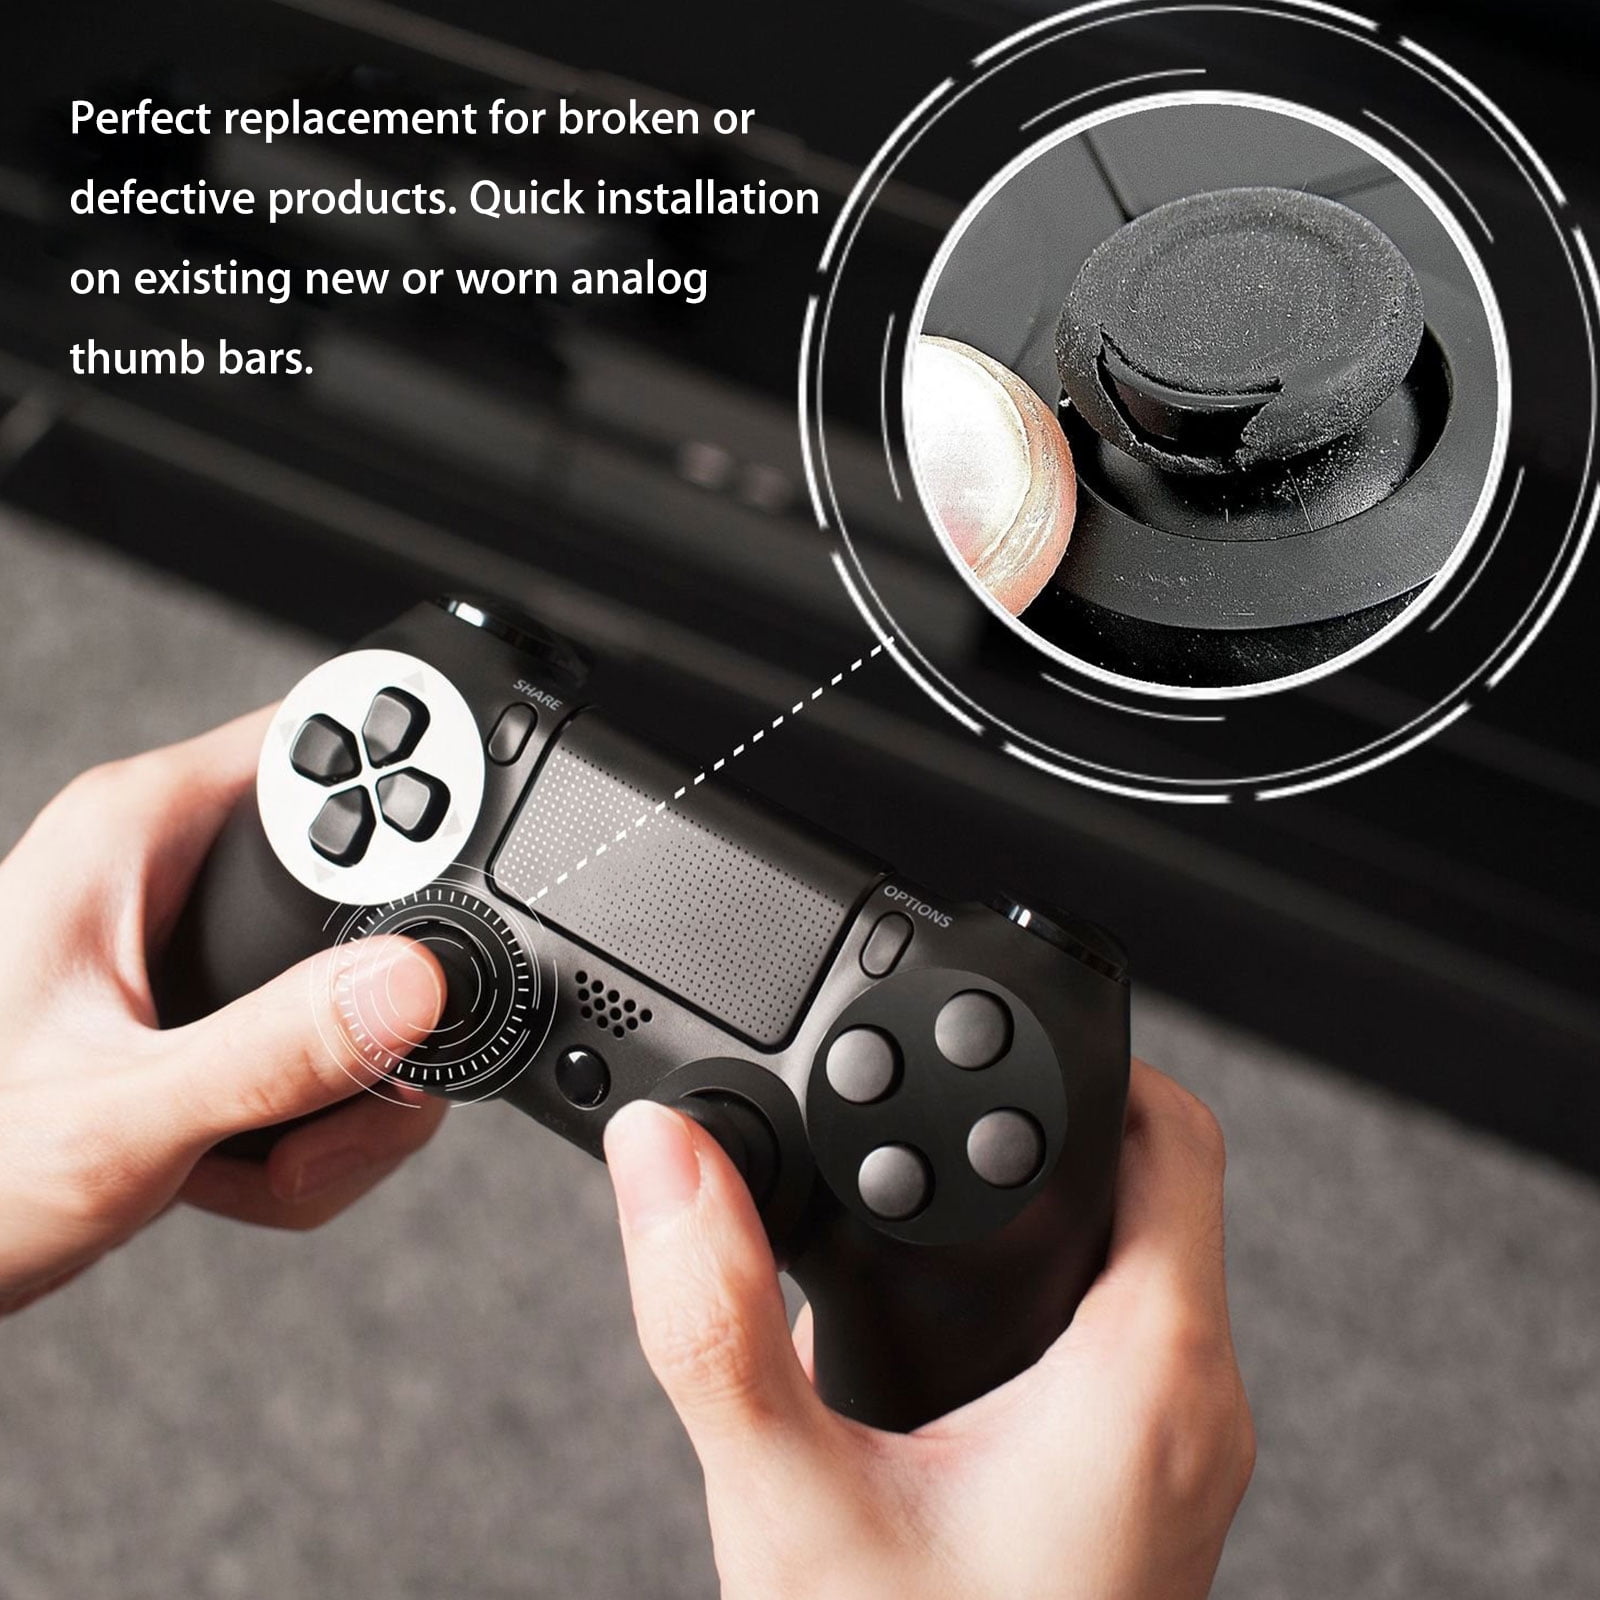 4 x Rubber Thumb Stick Cover Grip Caps For Sony PS4 XBOX One Analog Controller 